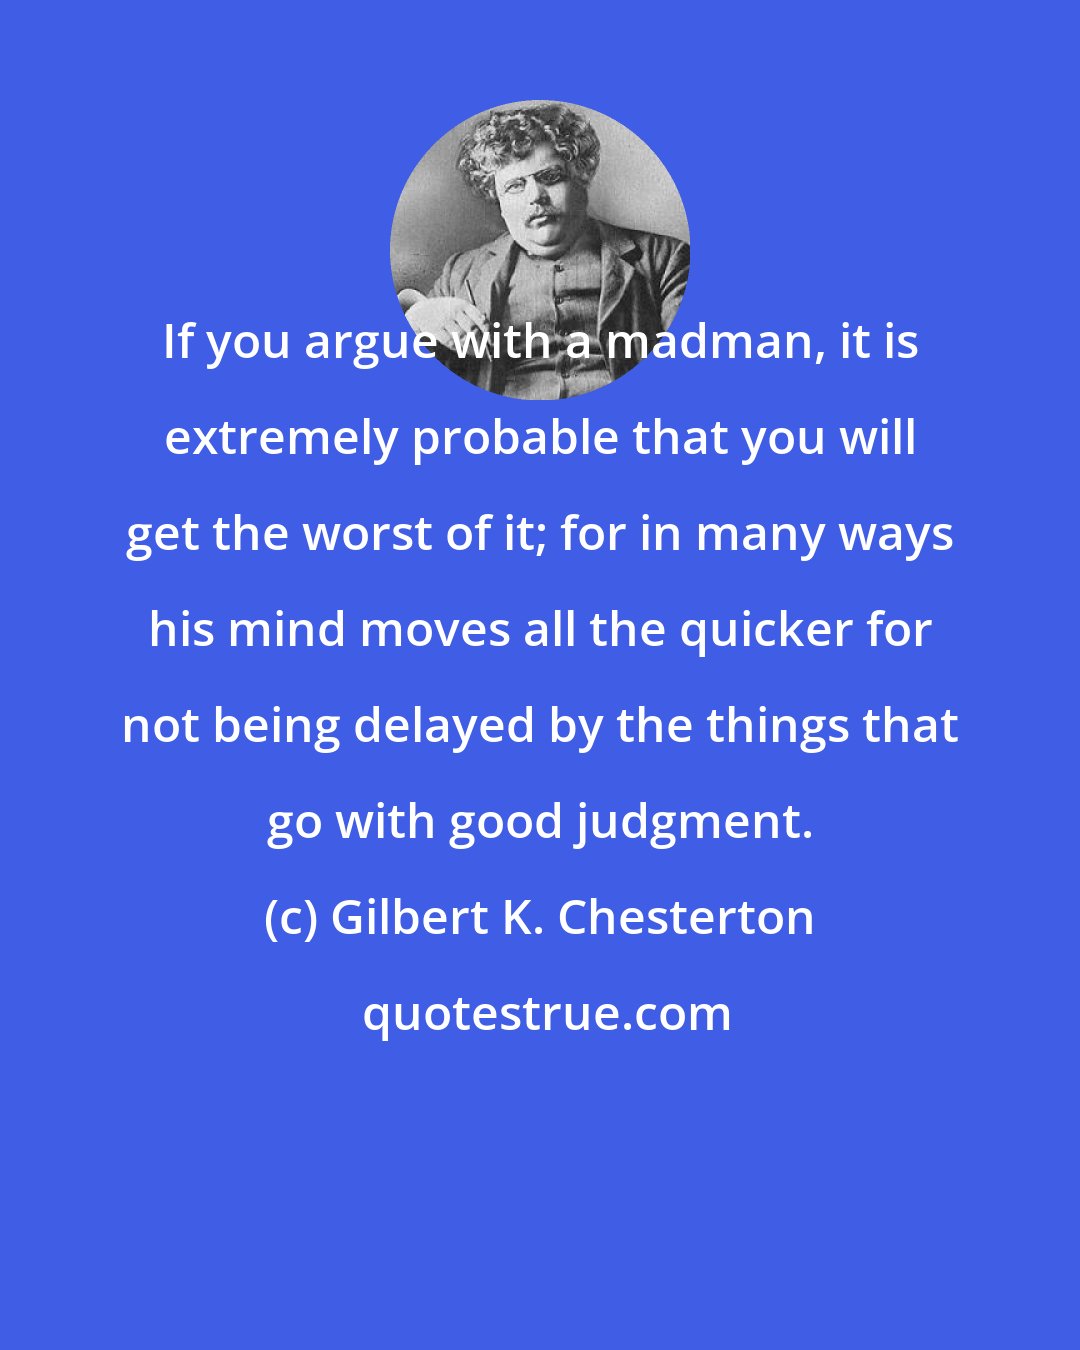 Gilbert K. Chesterton: If you argue with a madman, it is extremely probable that you will get the worst of it; for in many ways his mind moves all the quicker for not being delayed by the things that go with good judgment.